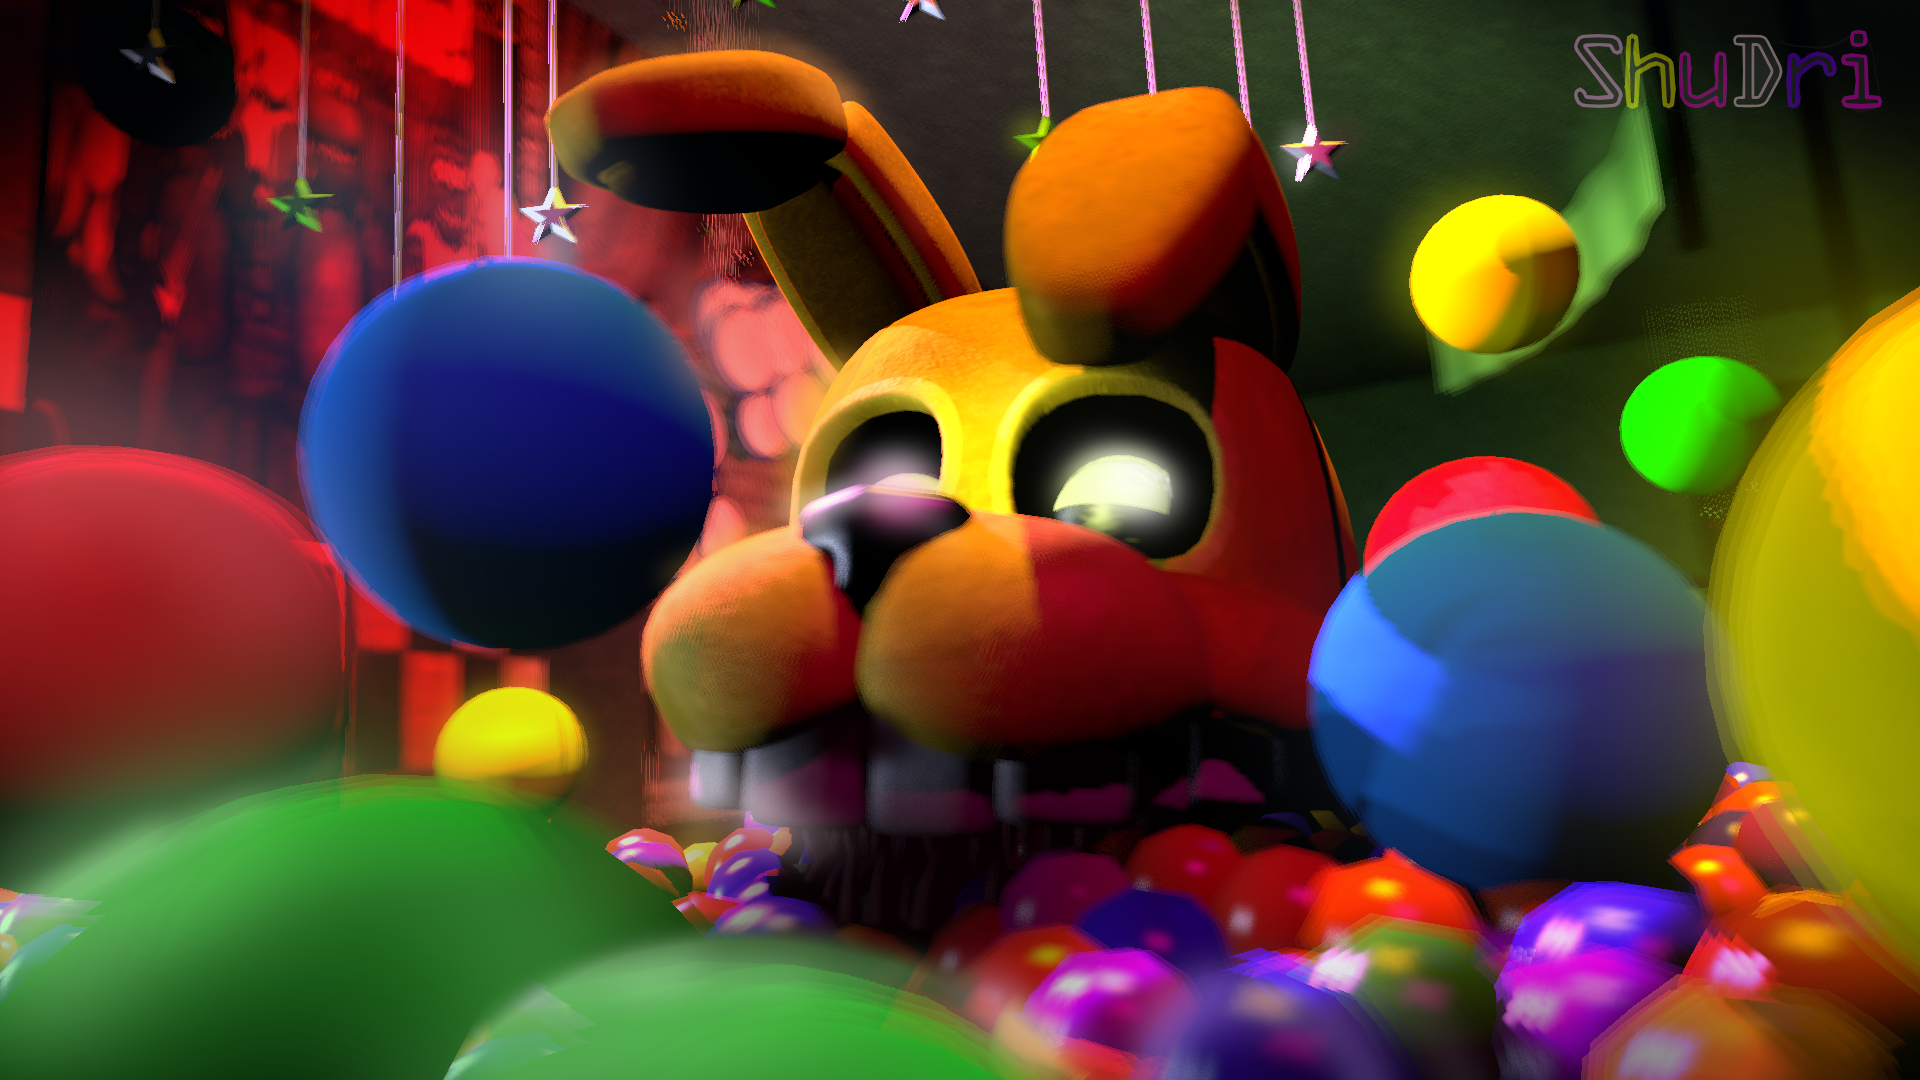 A into the pit render oof ITP Springbonnie model by: Thudner